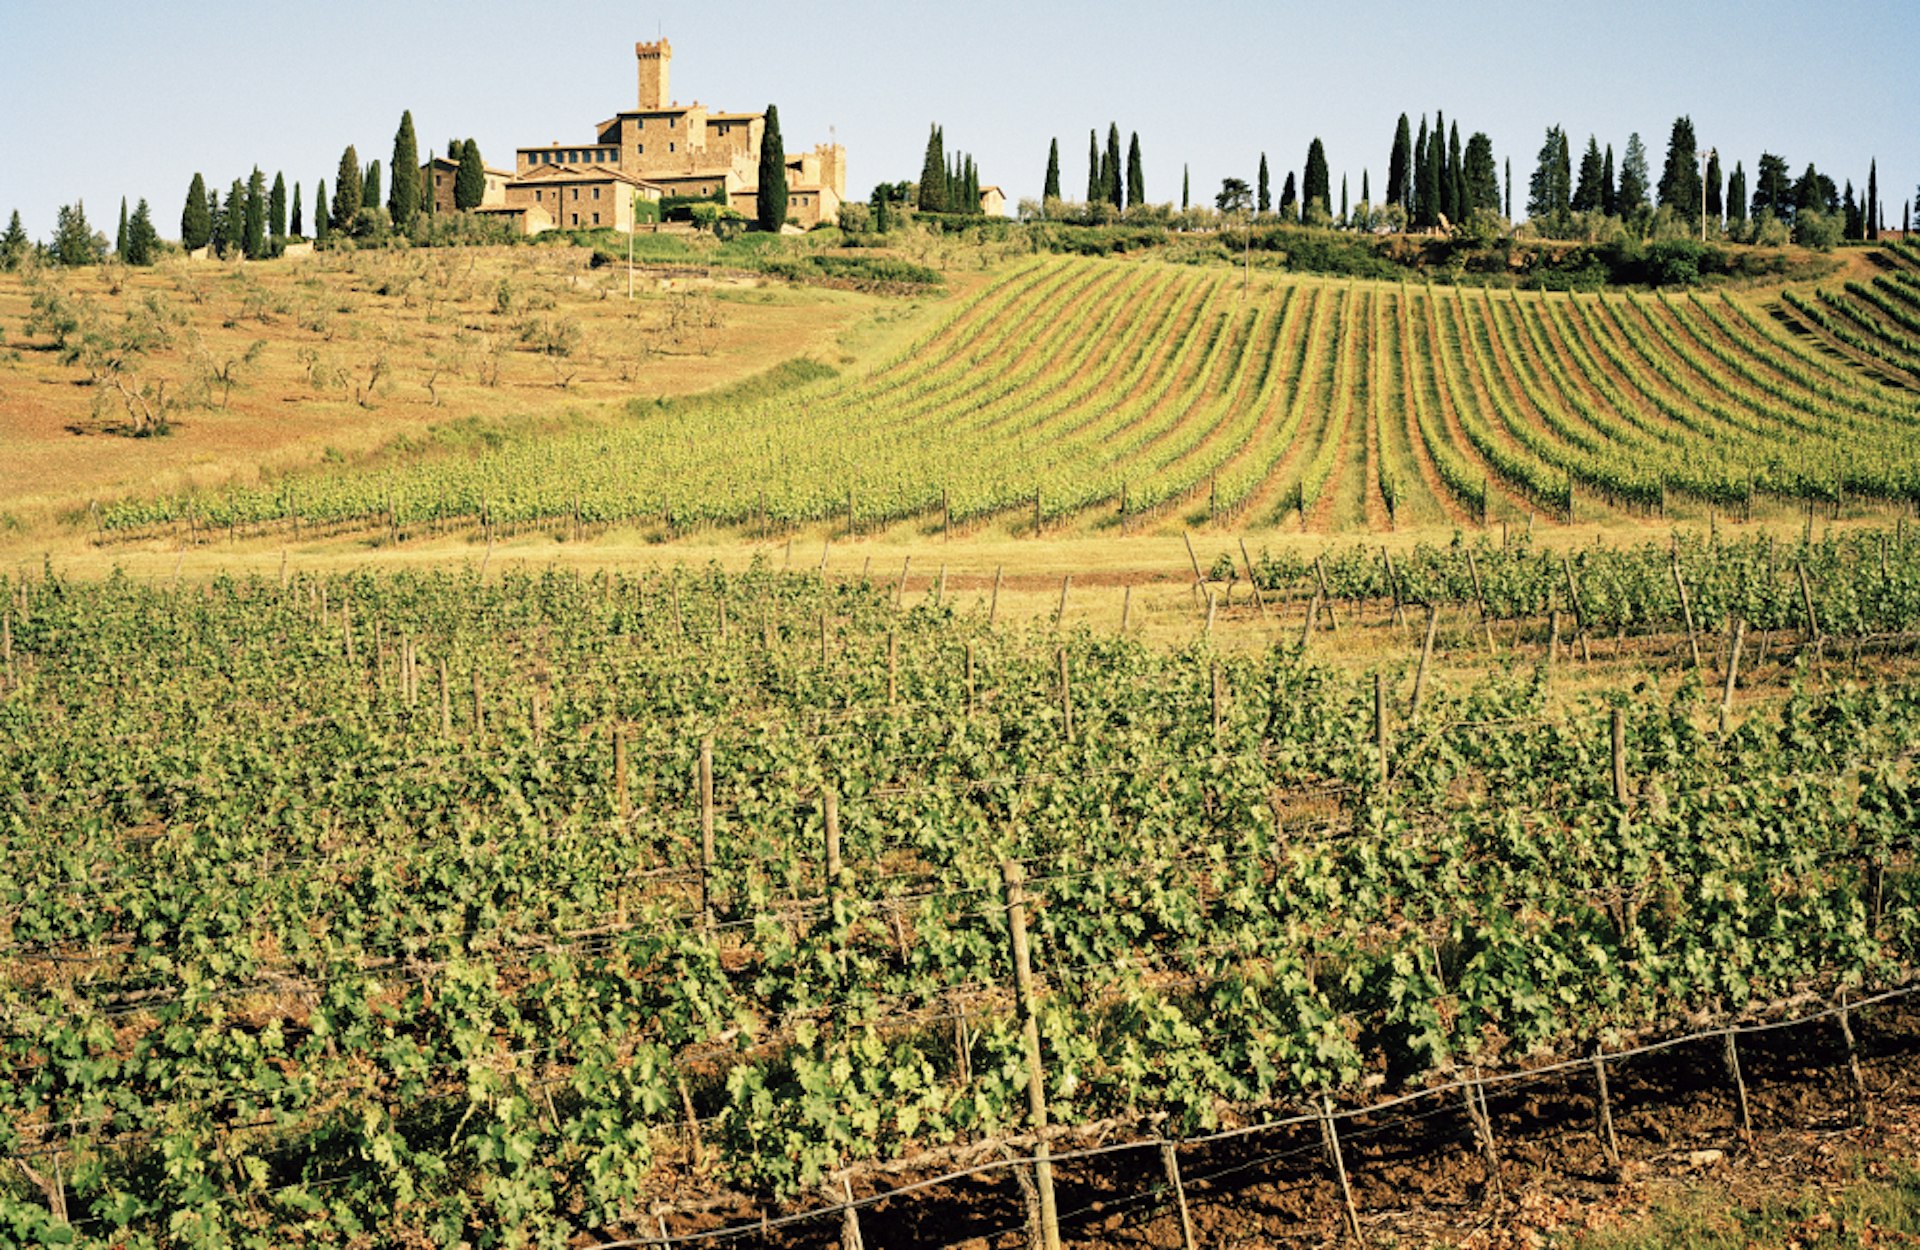 A sun-drenched vineyard in Montalcino, Tuscany.